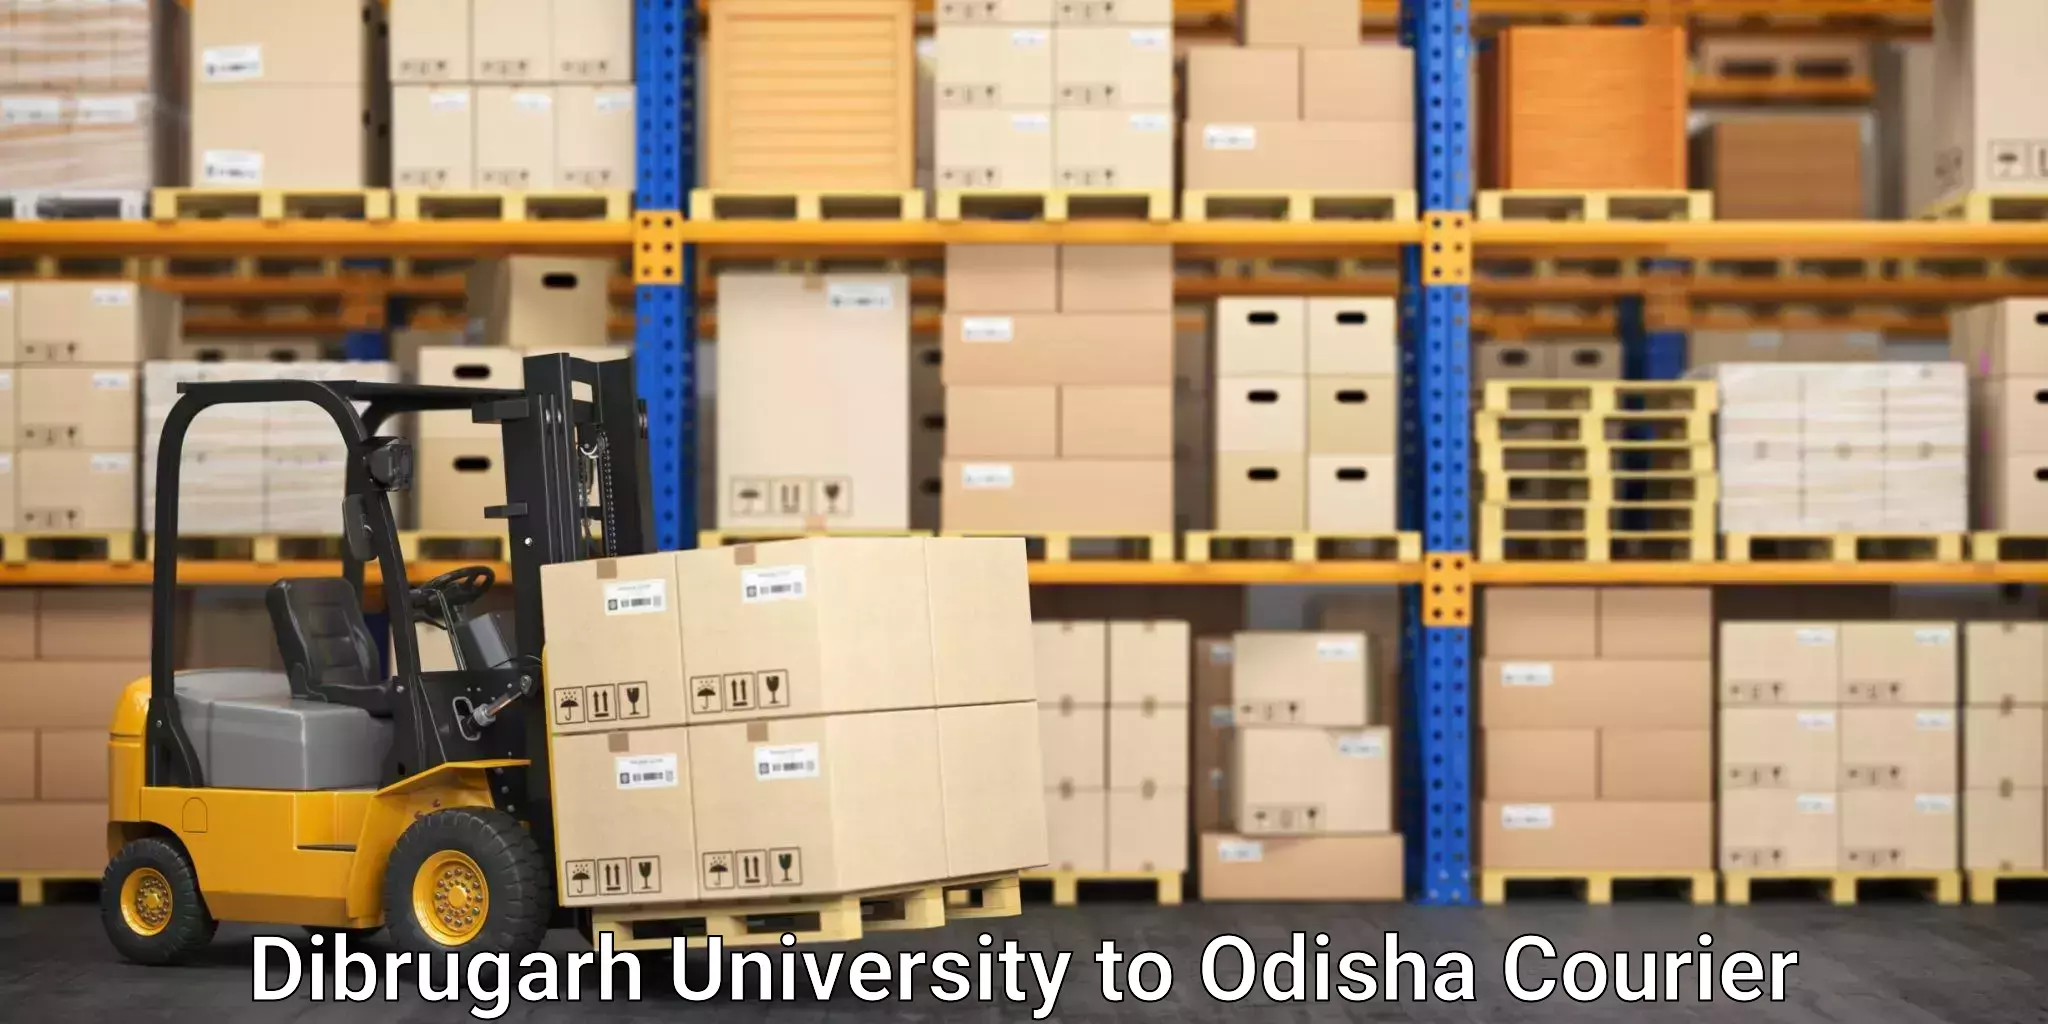 Global courier networks Dibrugarh University to Jajpur